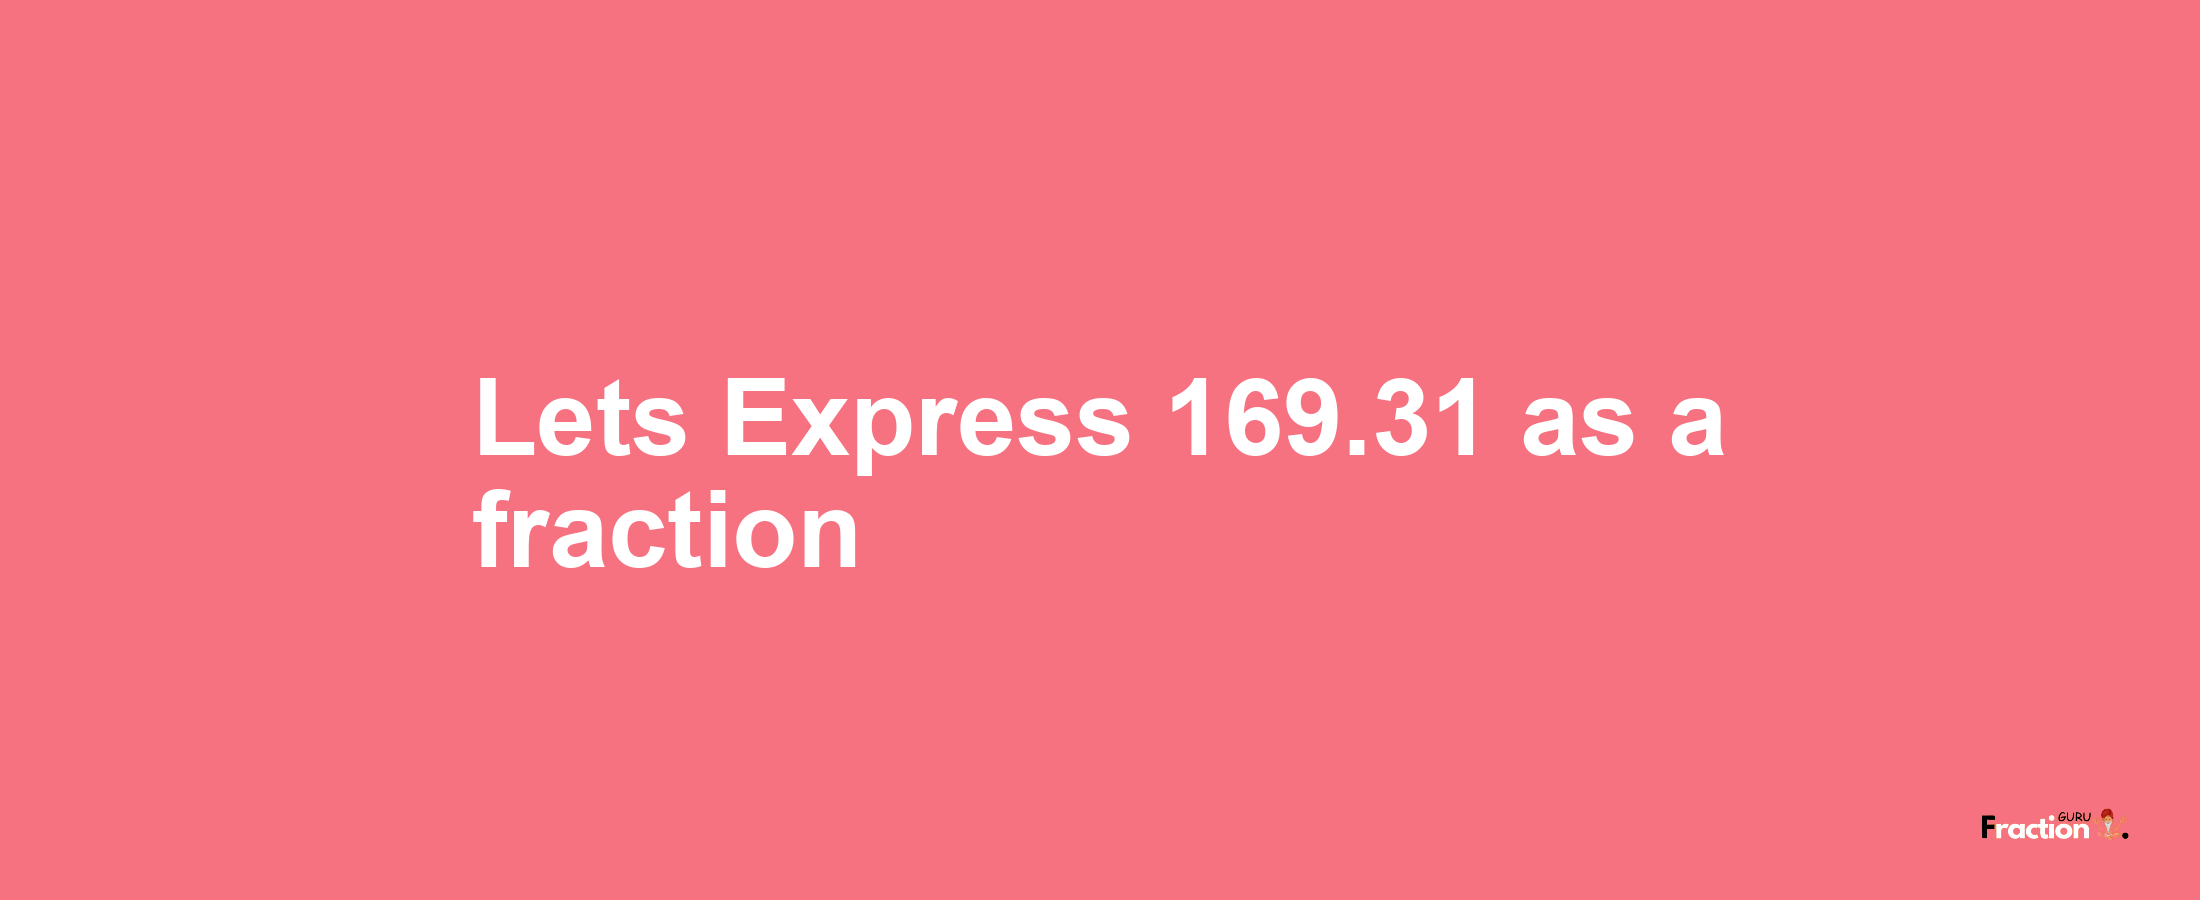 Lets Express 169.31 as afraction